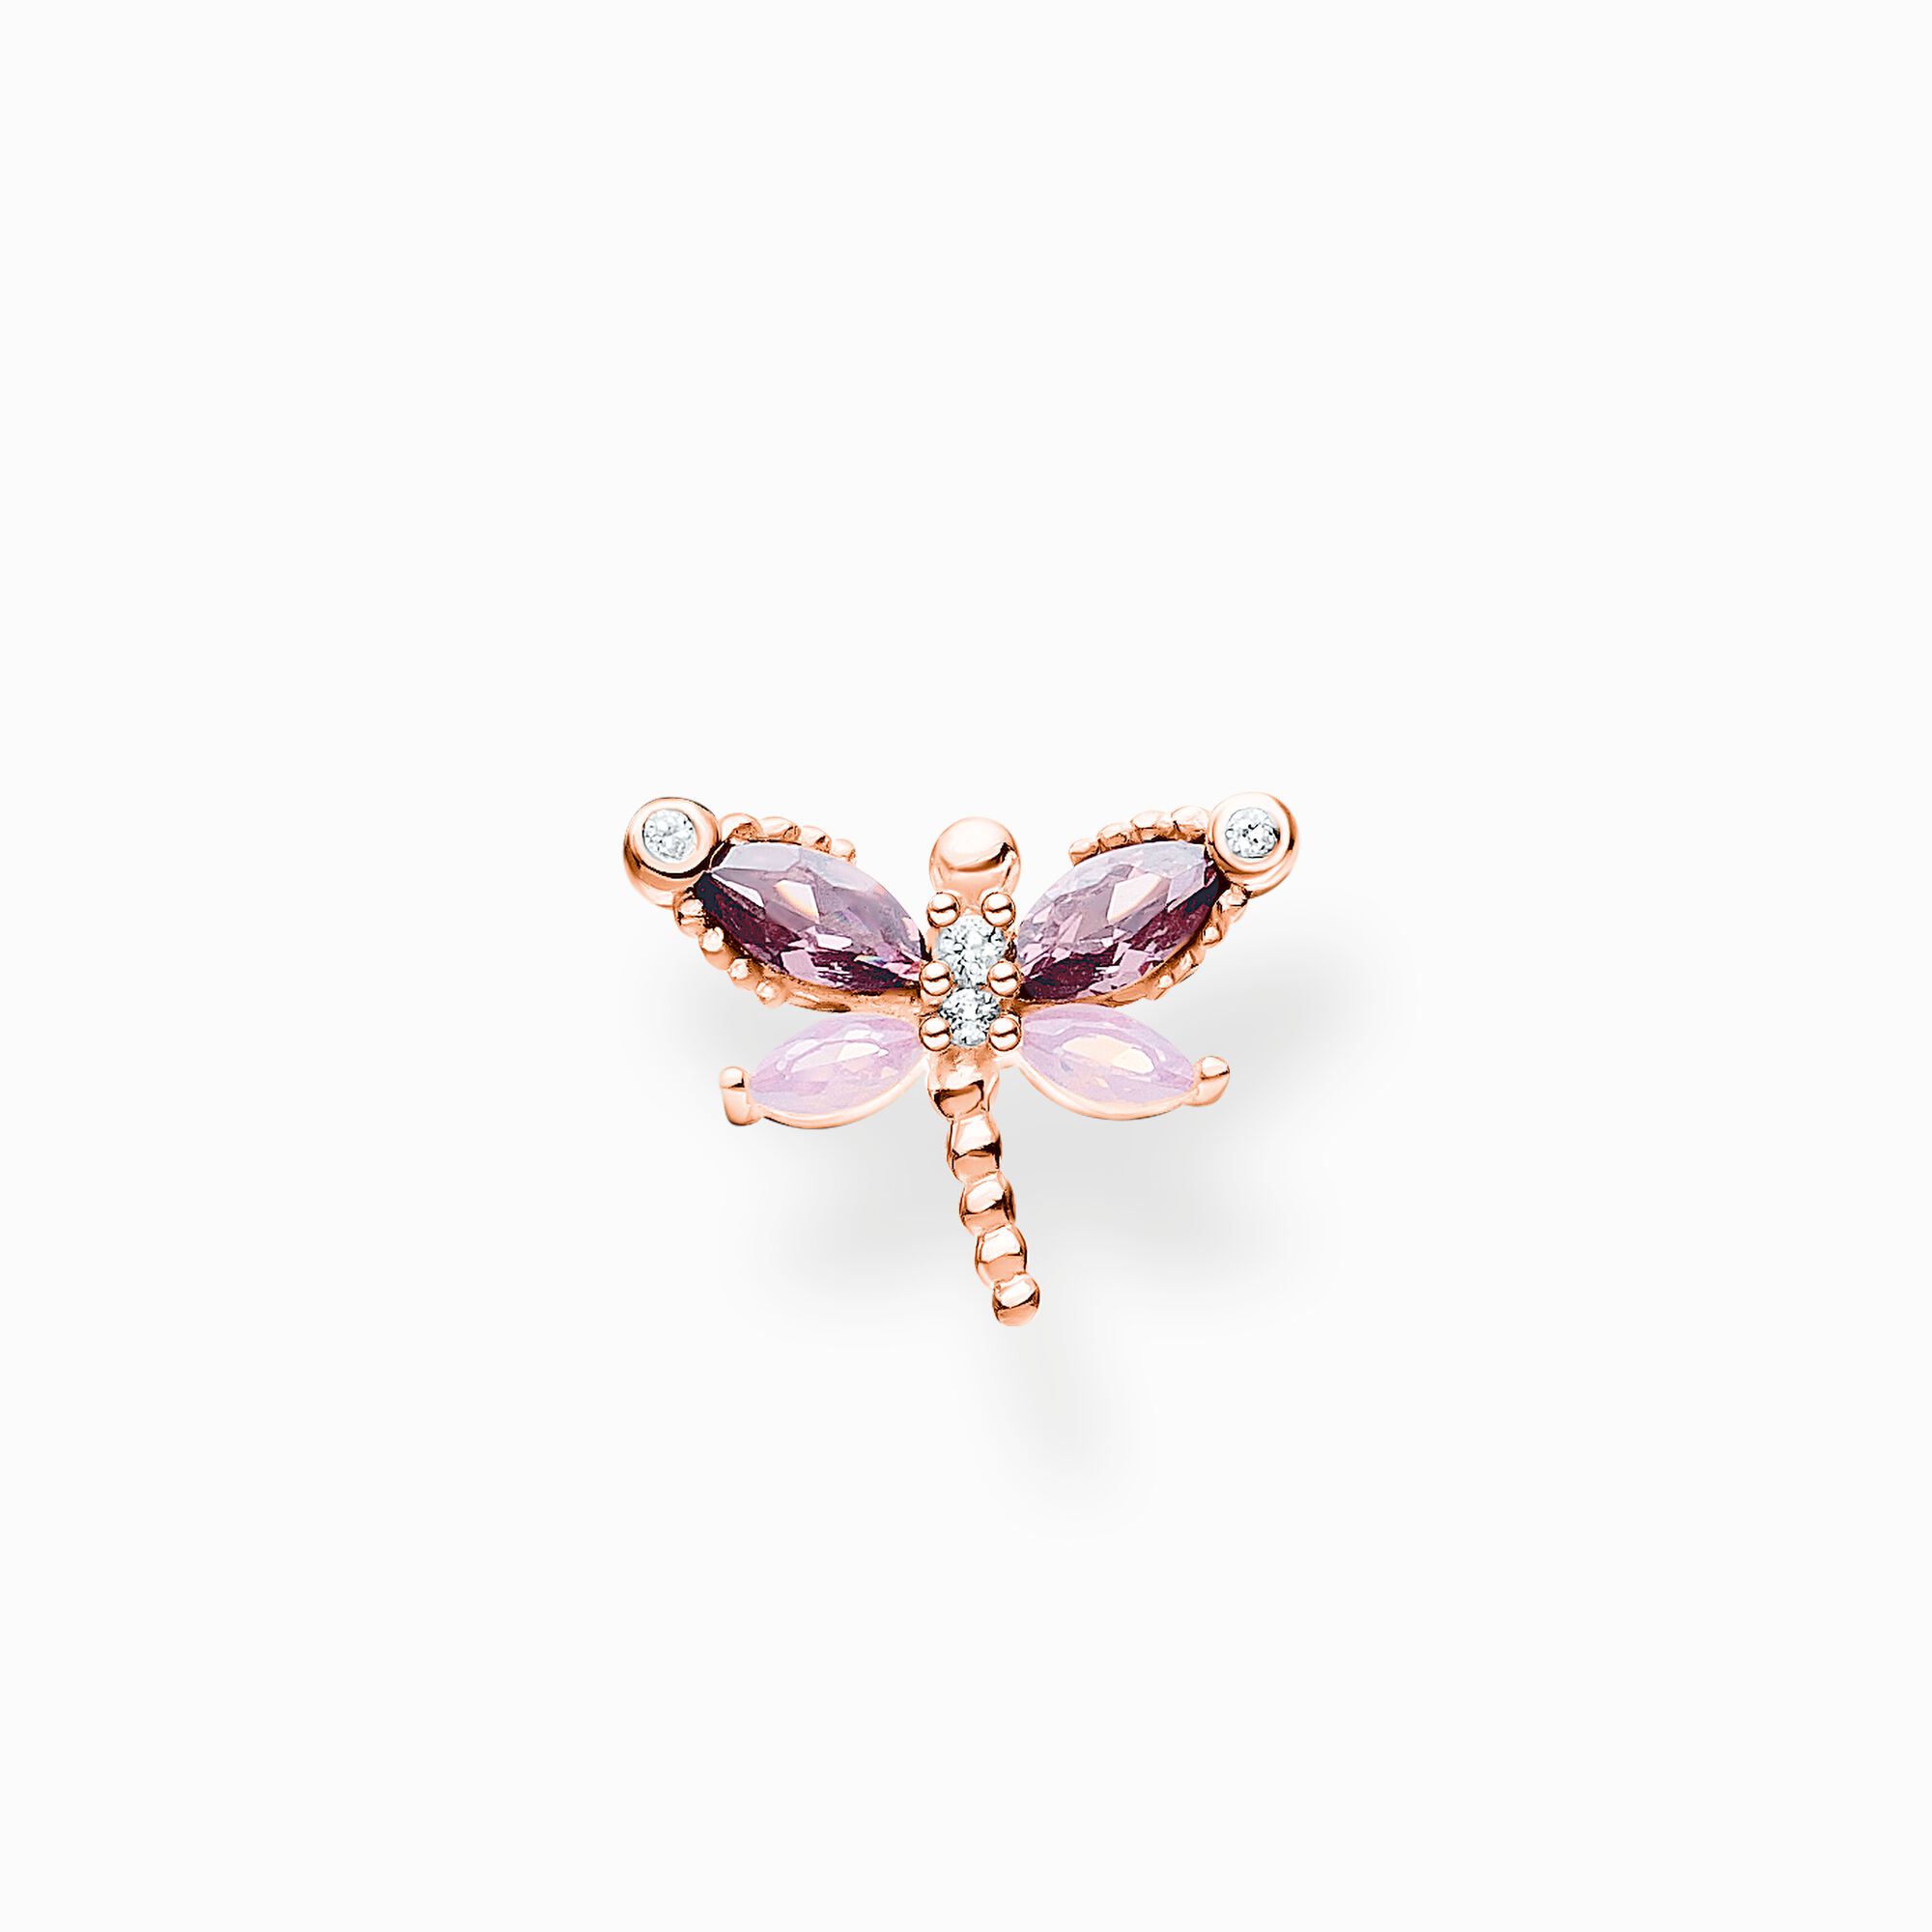 Single earring in dragonfly design | THOMAS SABO